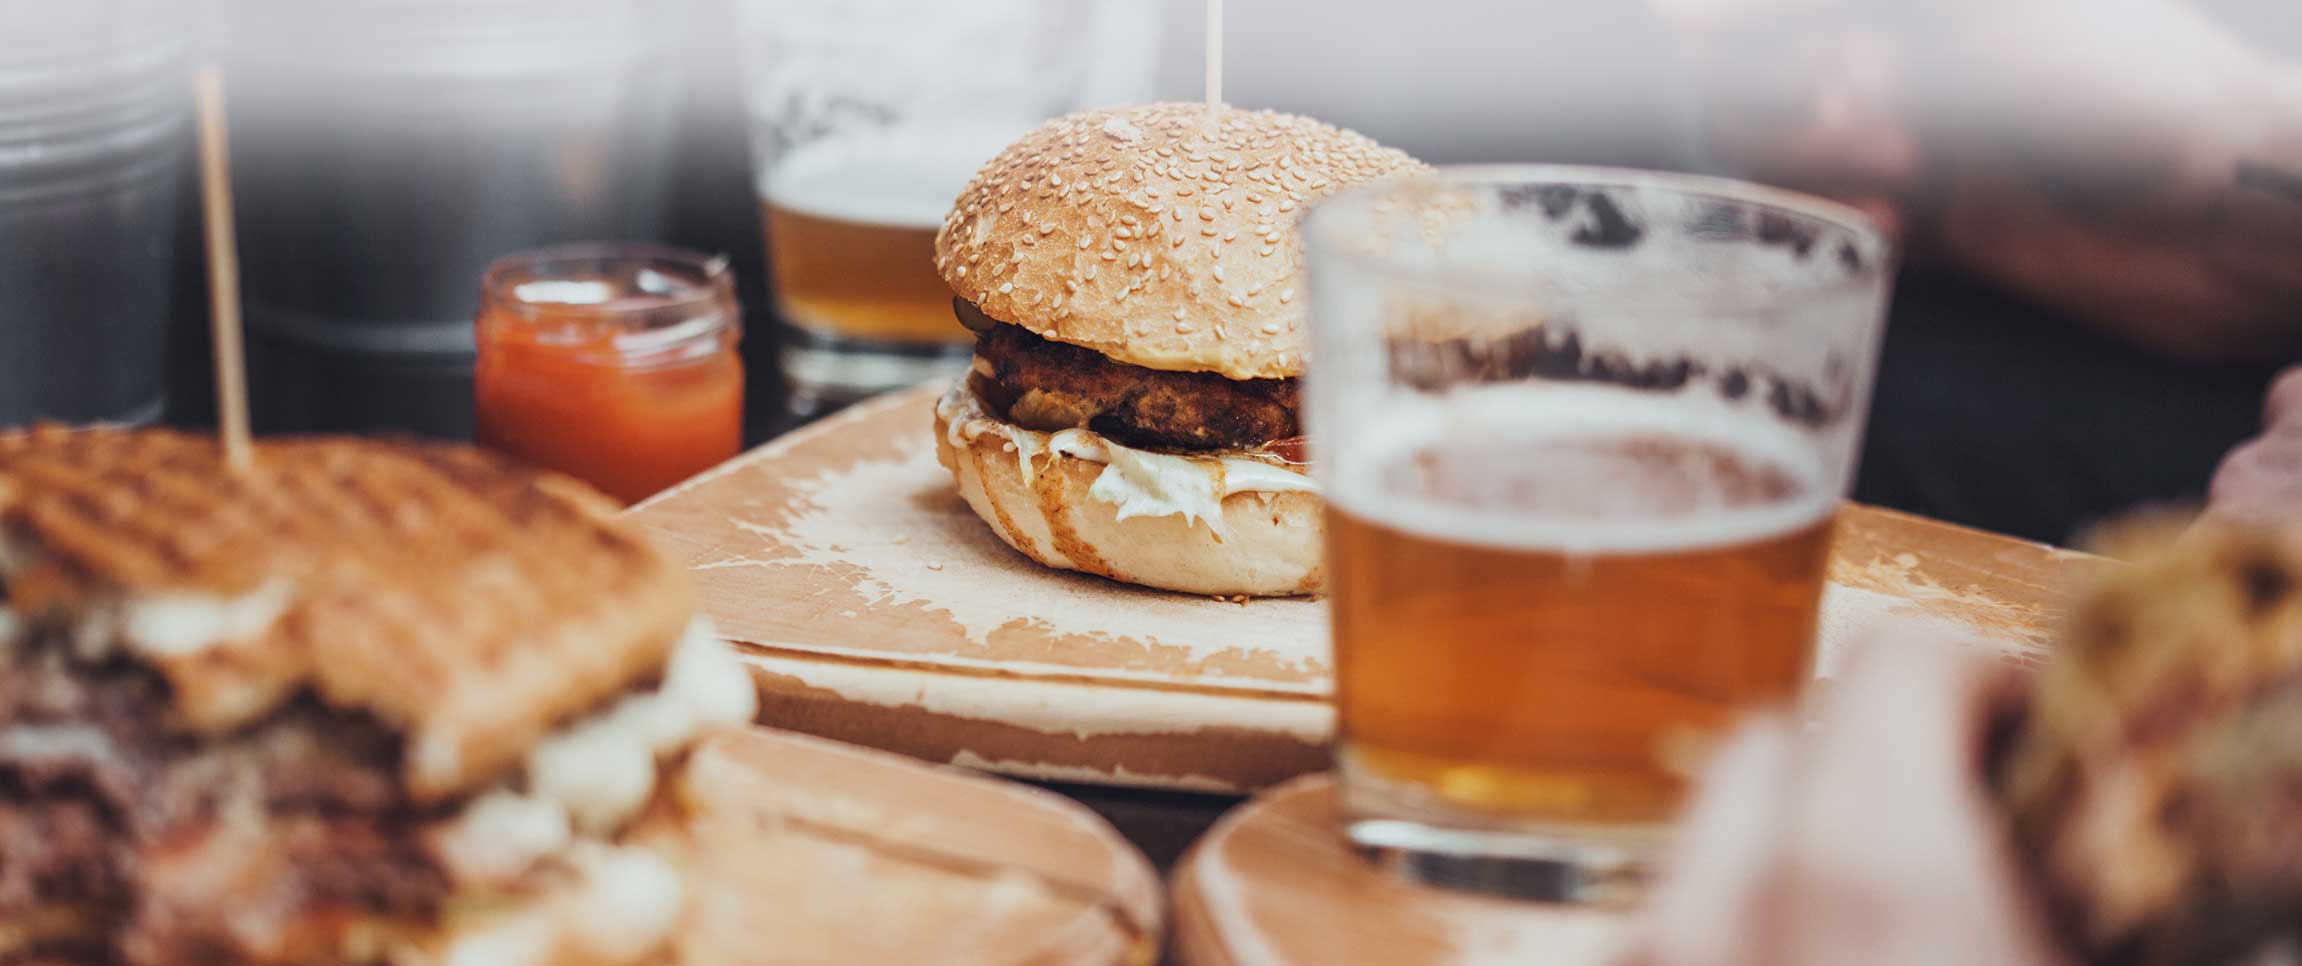 Delicious Pub Food. Burgers And Glasses Of Beer On Wooden Plates